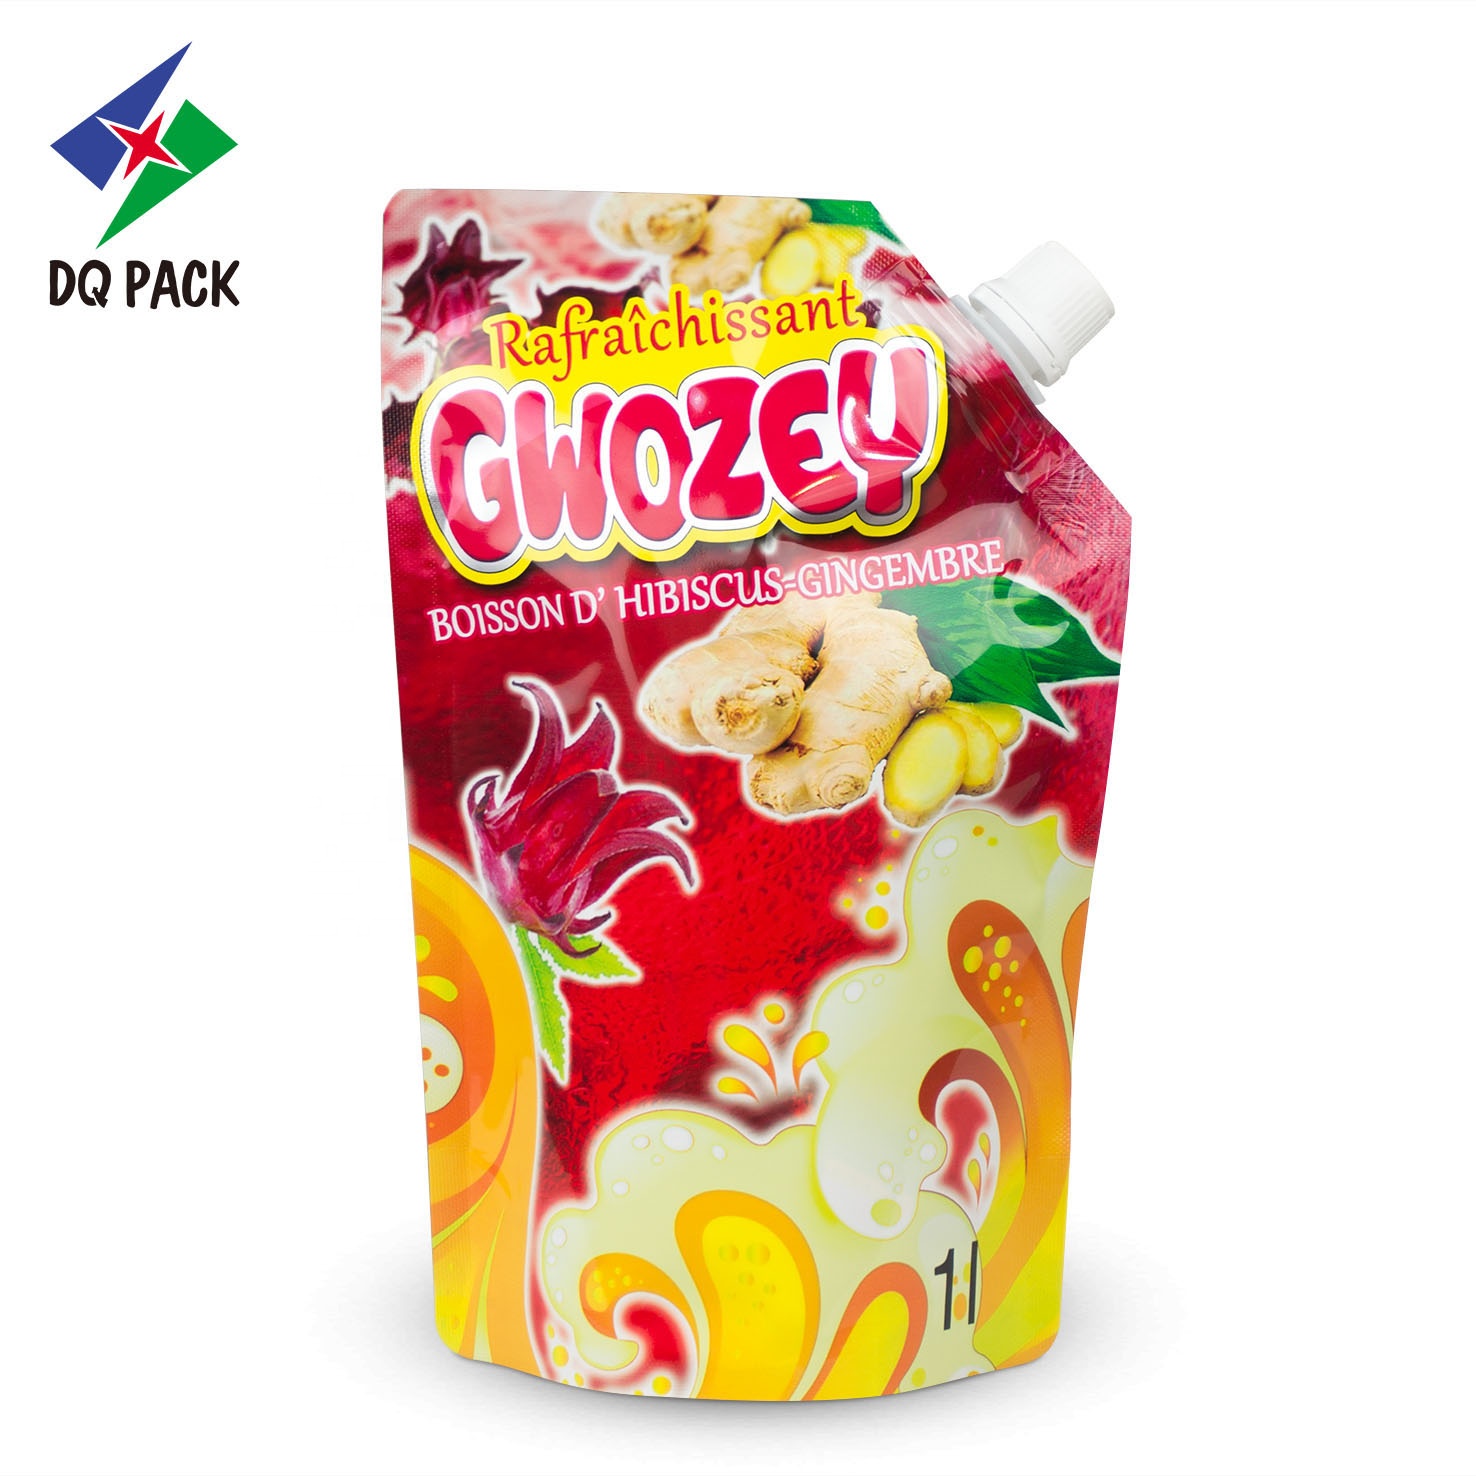 DQ PACK Custom Printed  Sauce Corne Nozzle Pouch  Food Packaging Stand Up Spout Pouch Bag